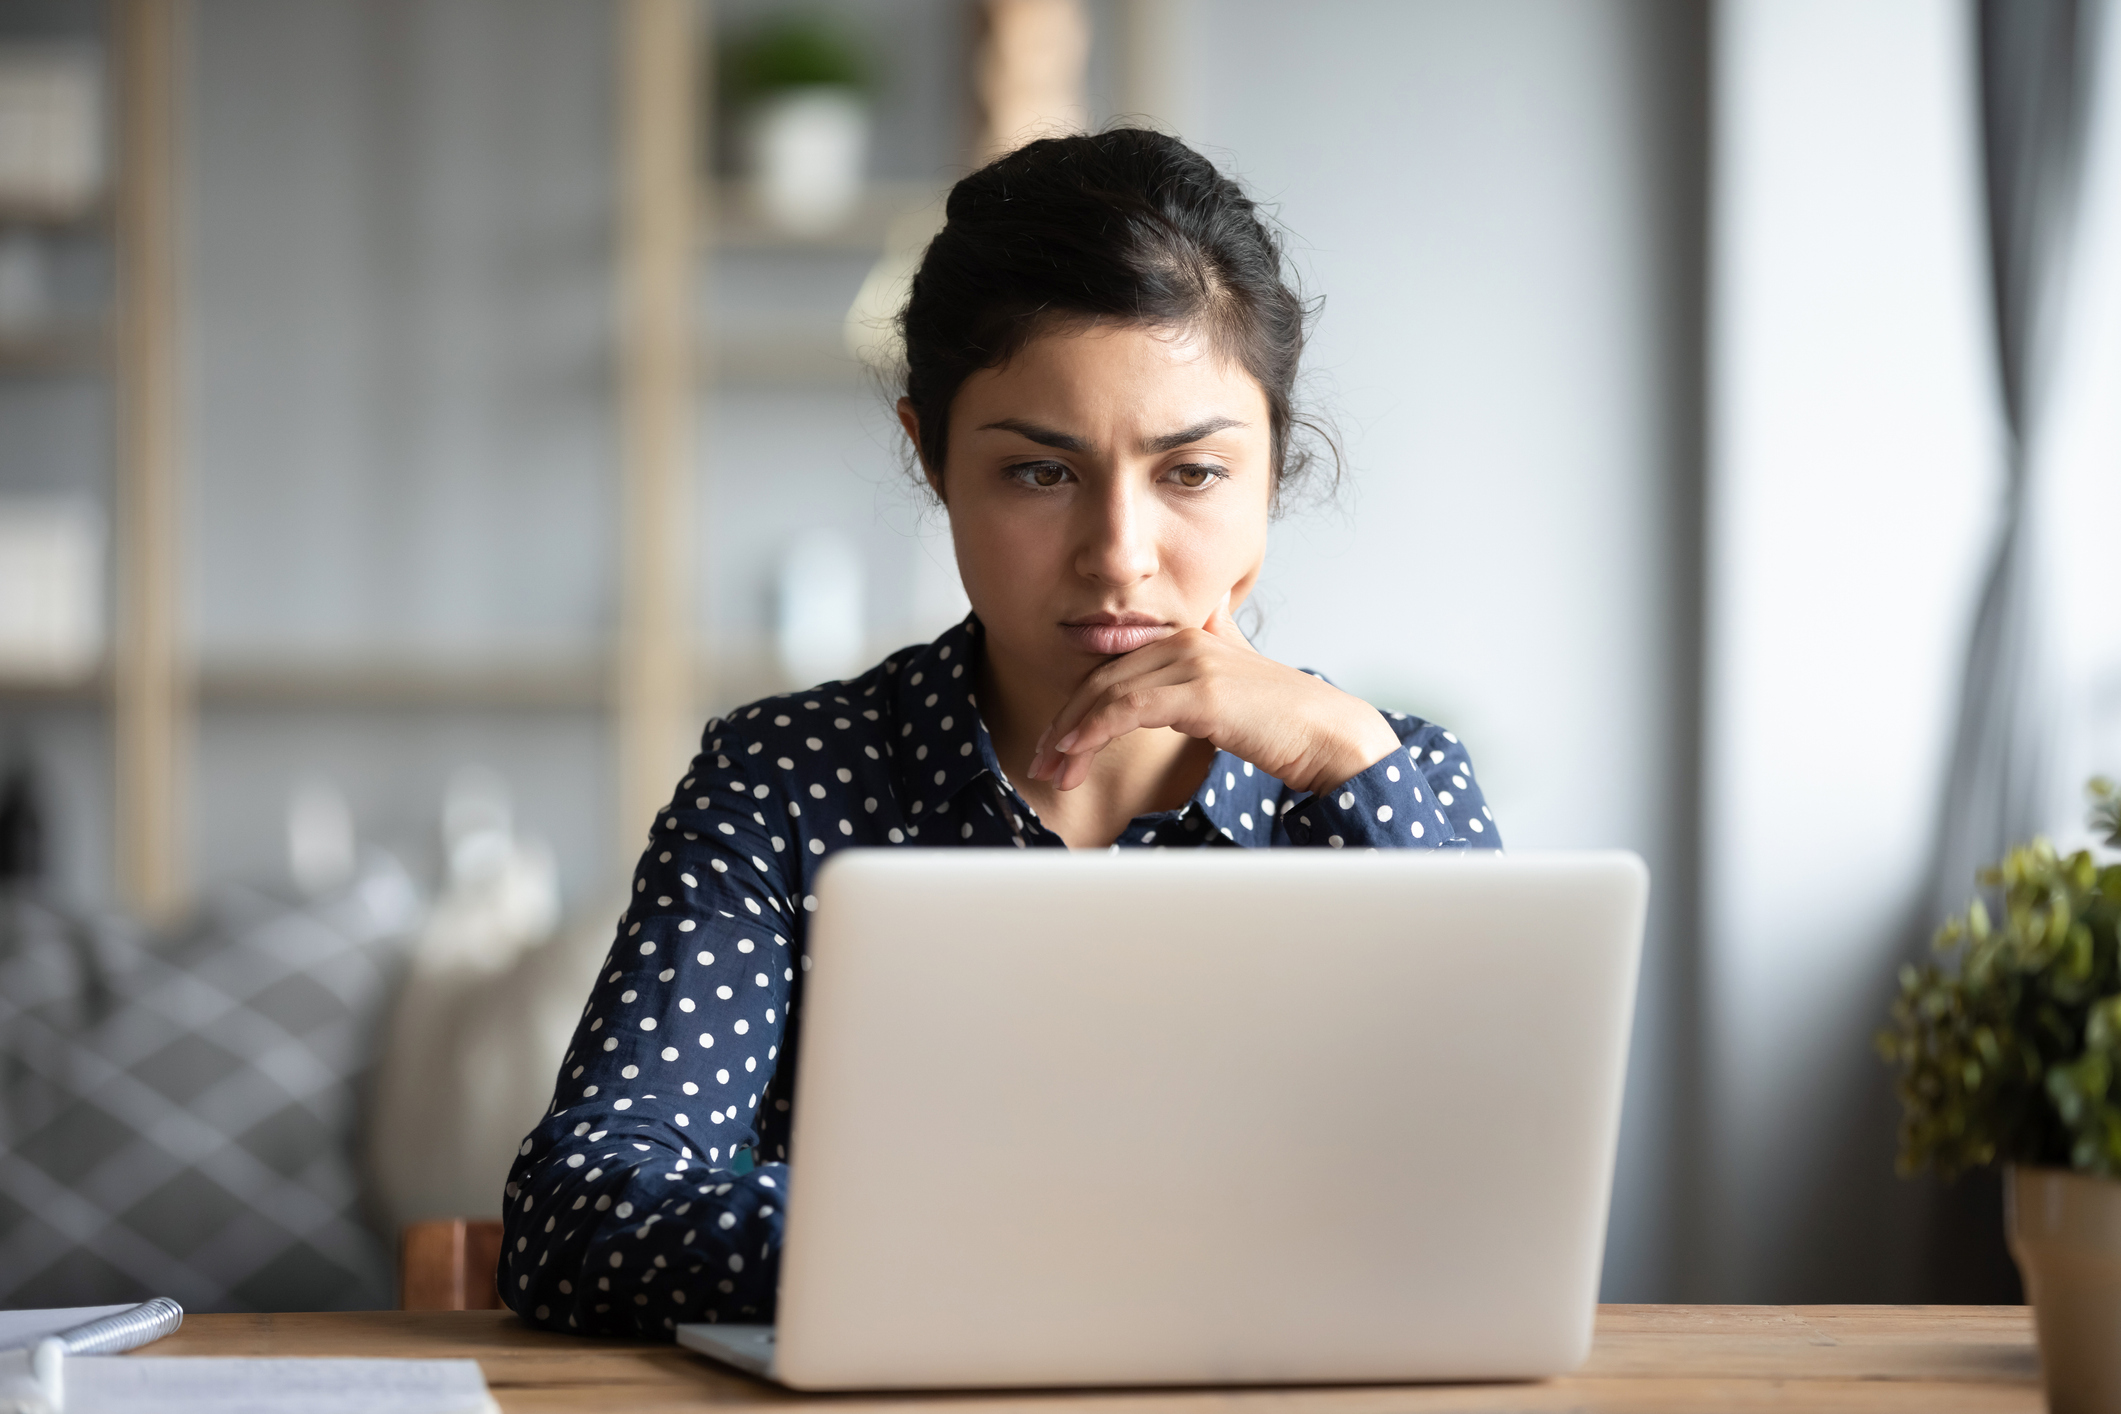 Woman with dark hair and blue polka dot shirt looks at laptop with a concerned look on her face.